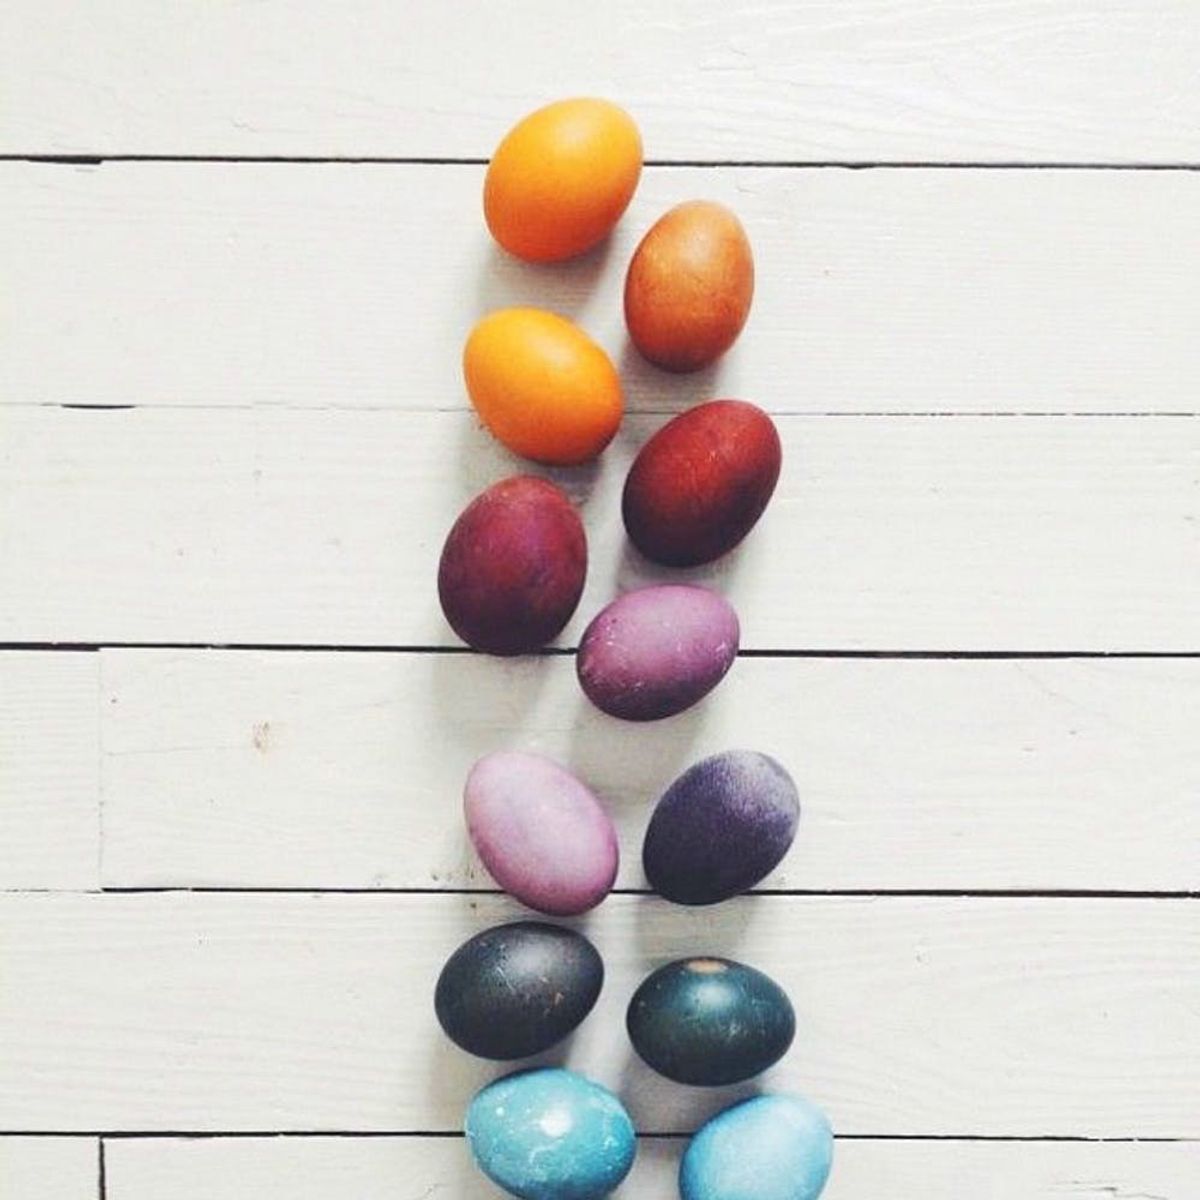 11 Ways to Naturally Dye Easter Eggs